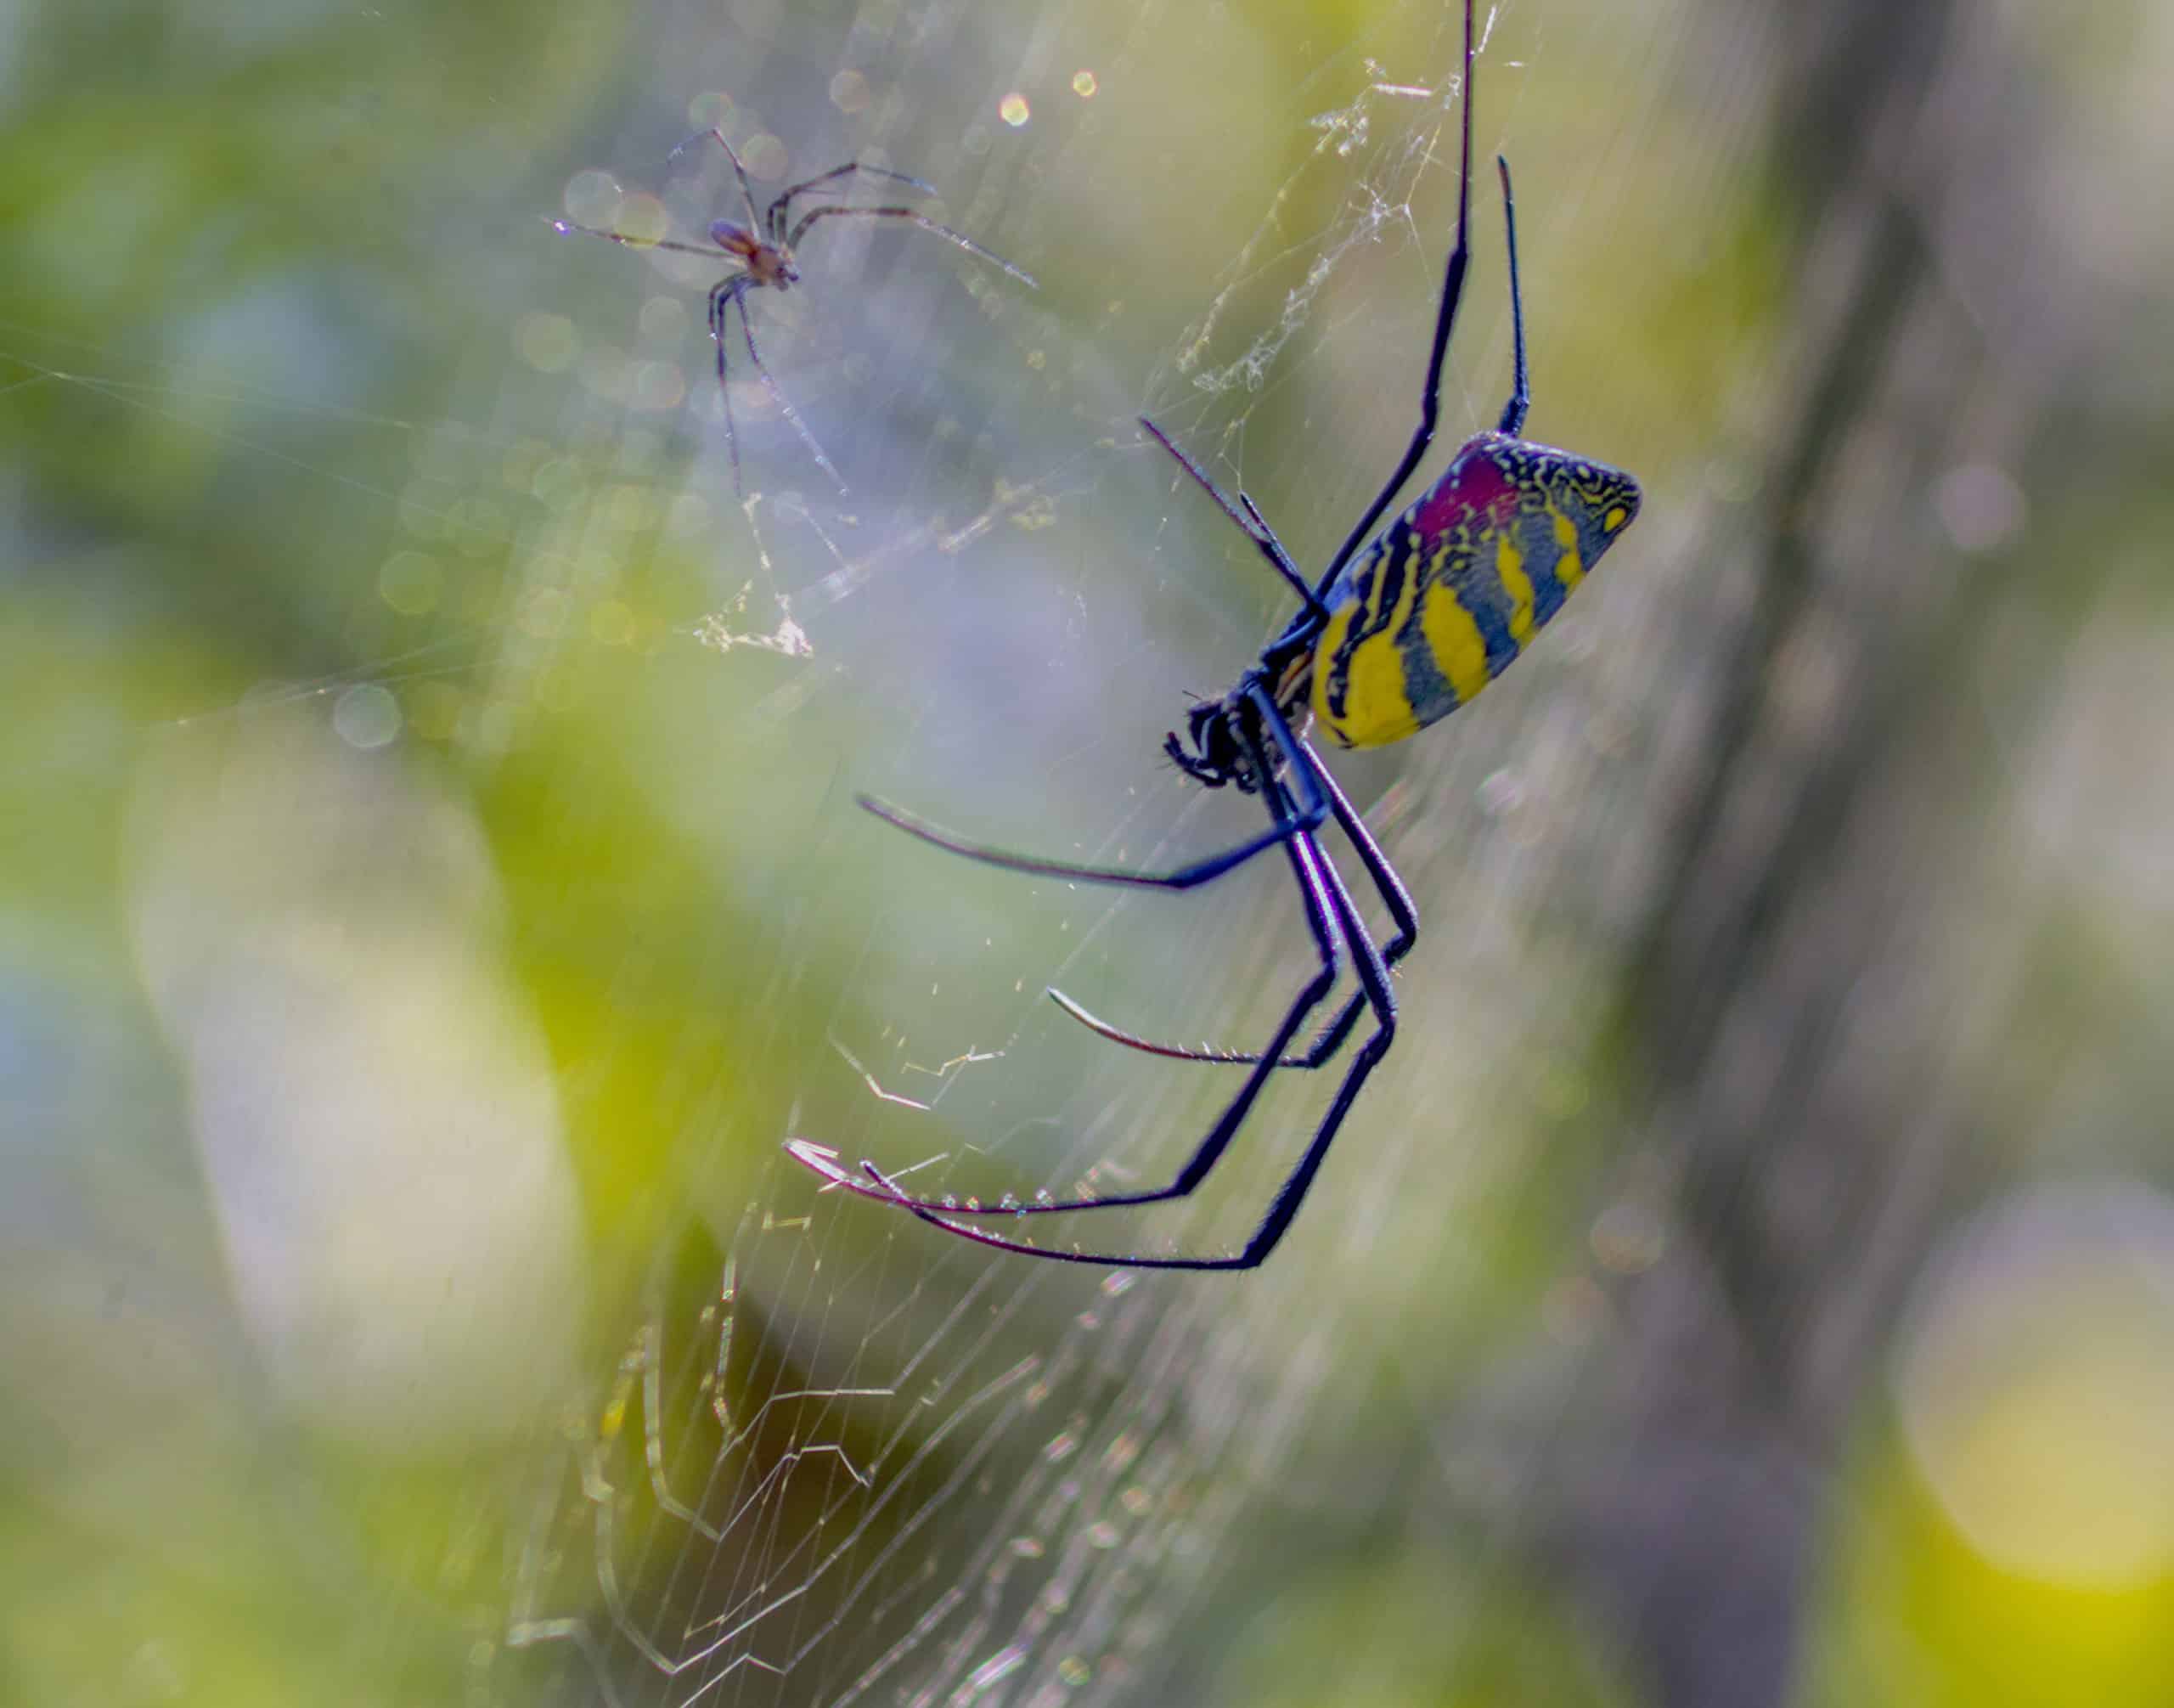 8 Captivating Facts About Spider Silk